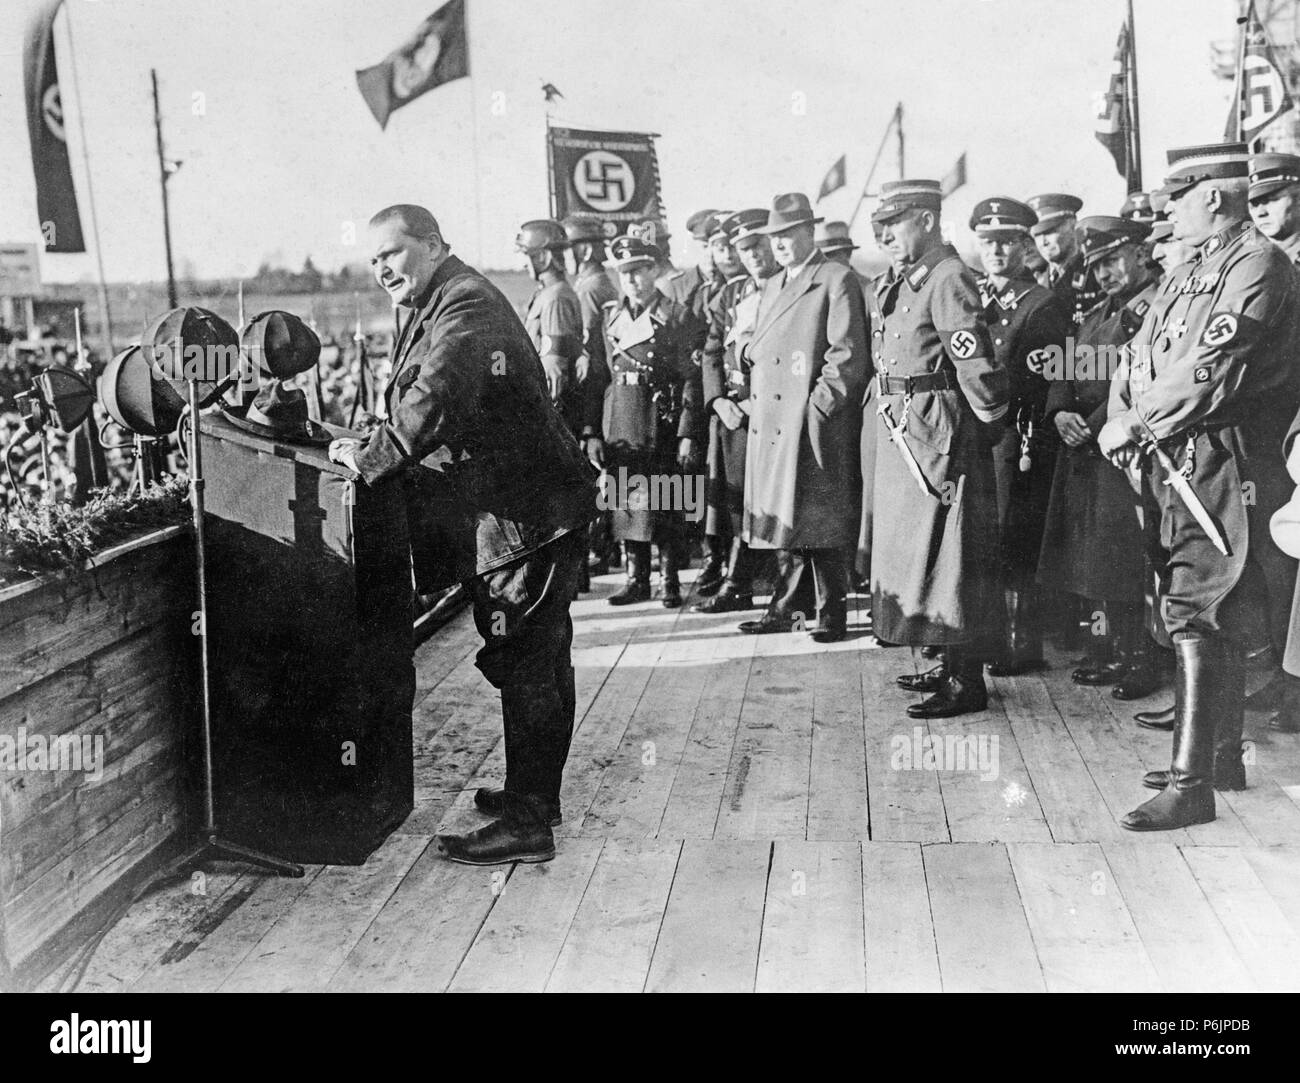 Senior Nazi party member Hermann Goering opens the Berlin to Stettin autobahn in Germany on 4th March 1936. Stock Photo